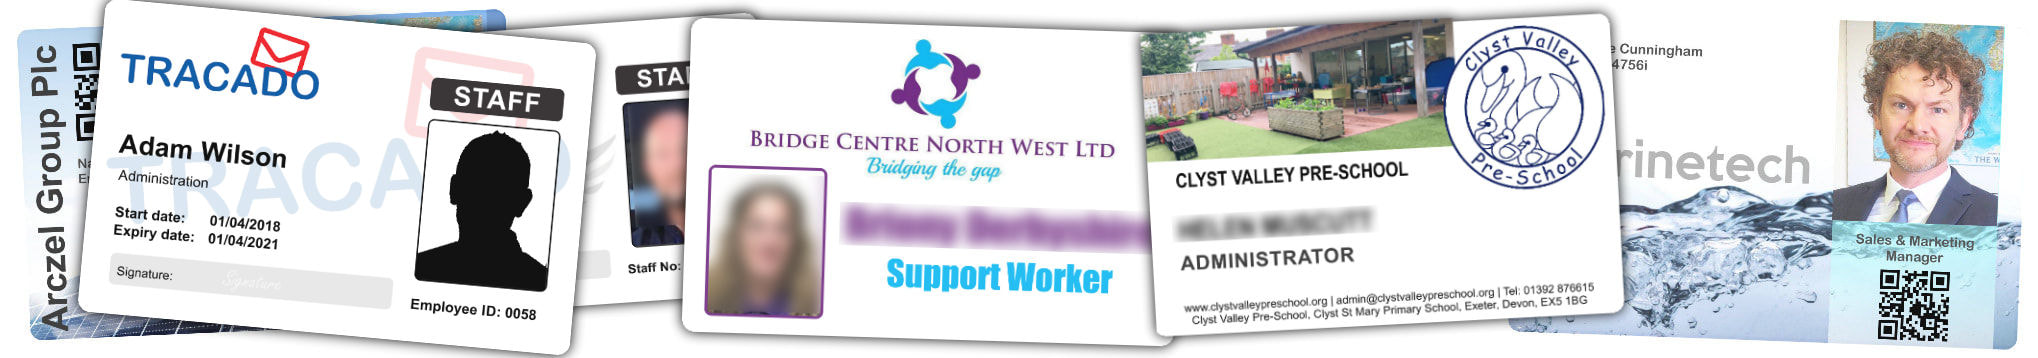 Gloucester examples of staff photo ID cards | samples of employee Identity card printing | Workers ID cards printed in 